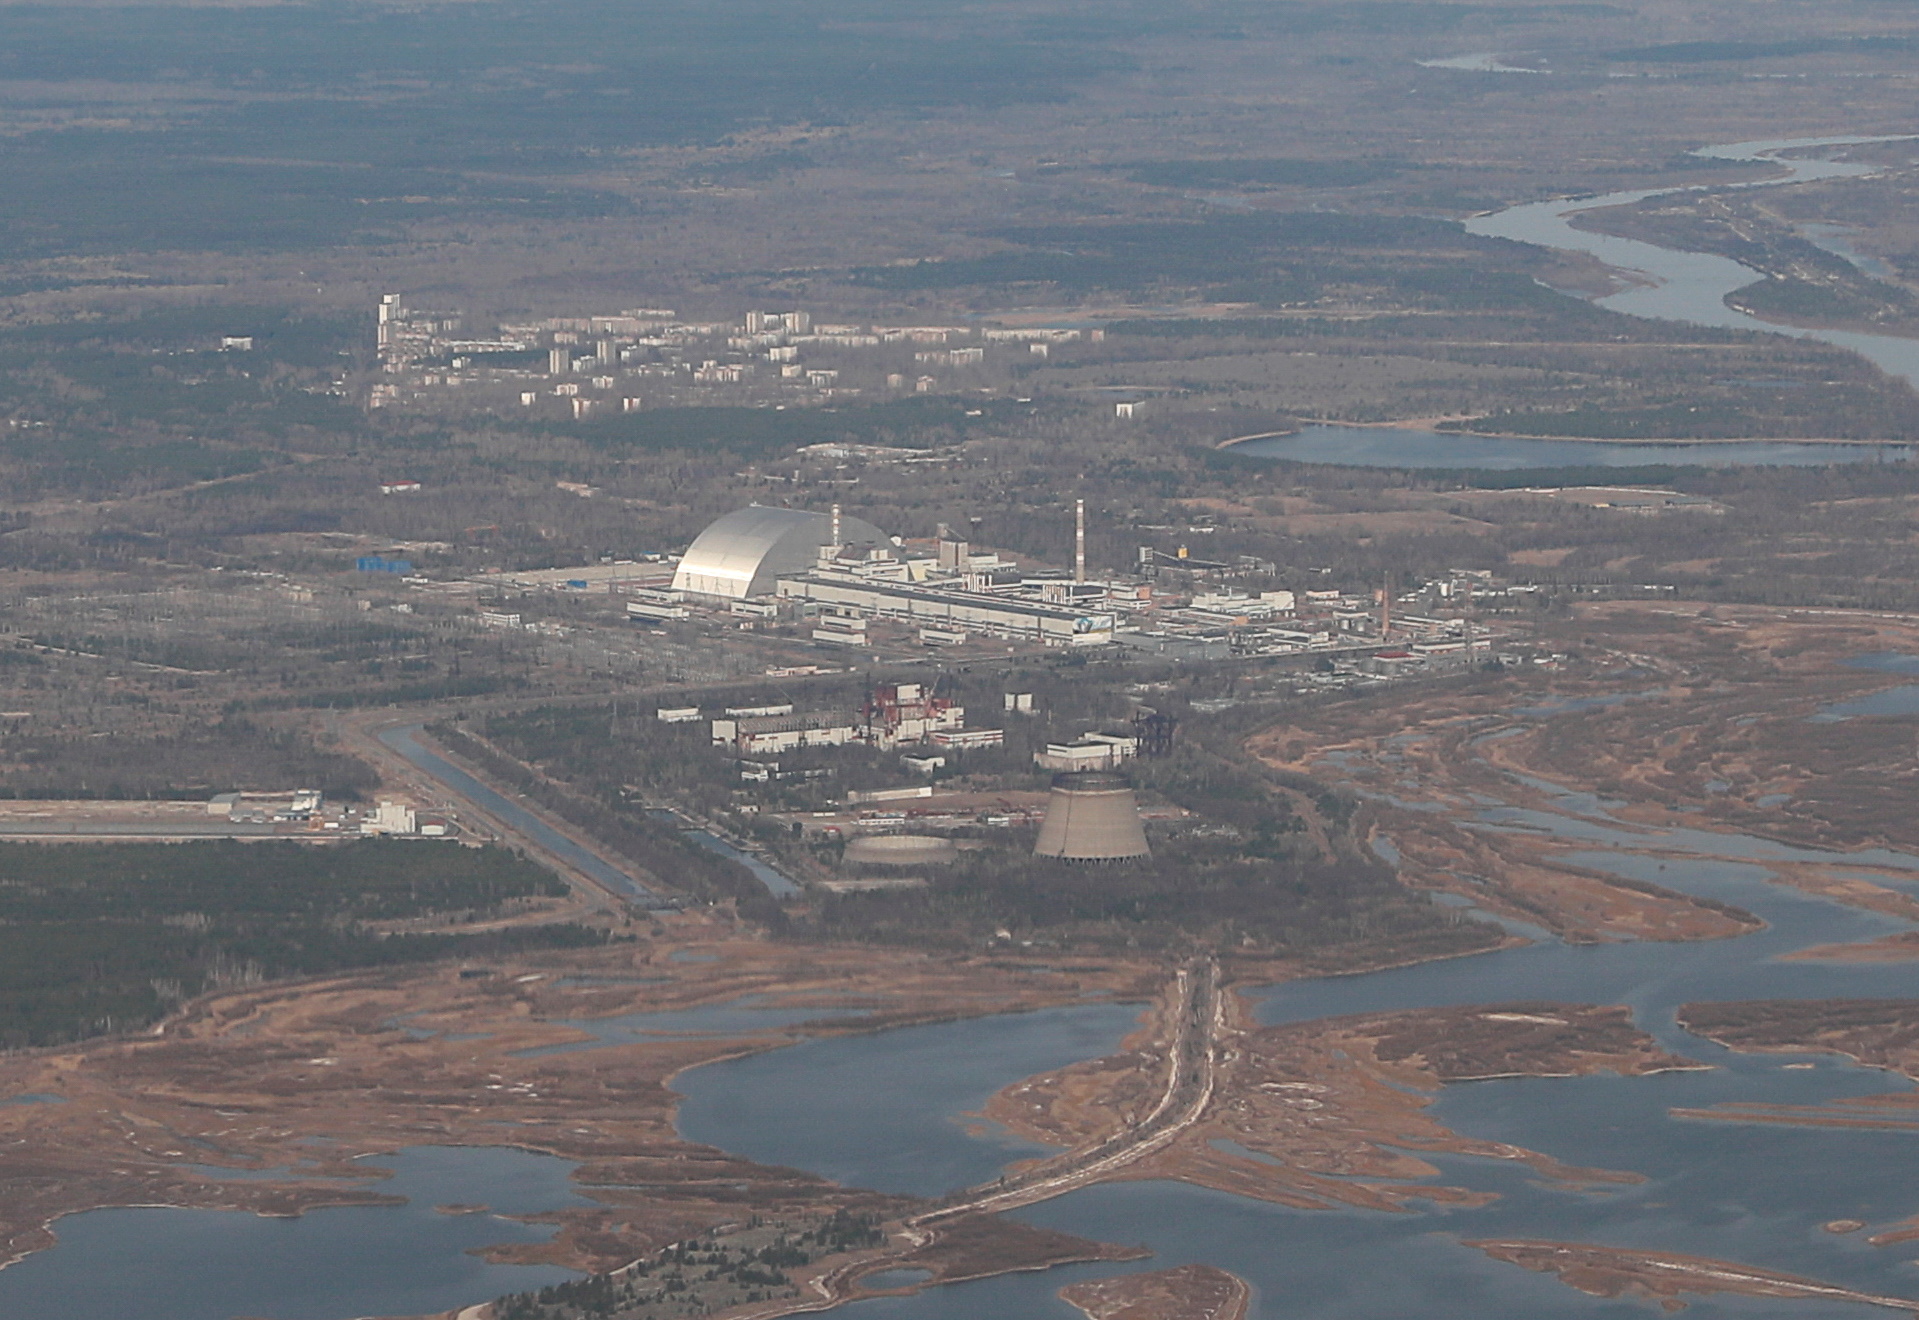 A view shows the Chernobyl Nuclear Power Plant during a tour to the Chernobyl zone